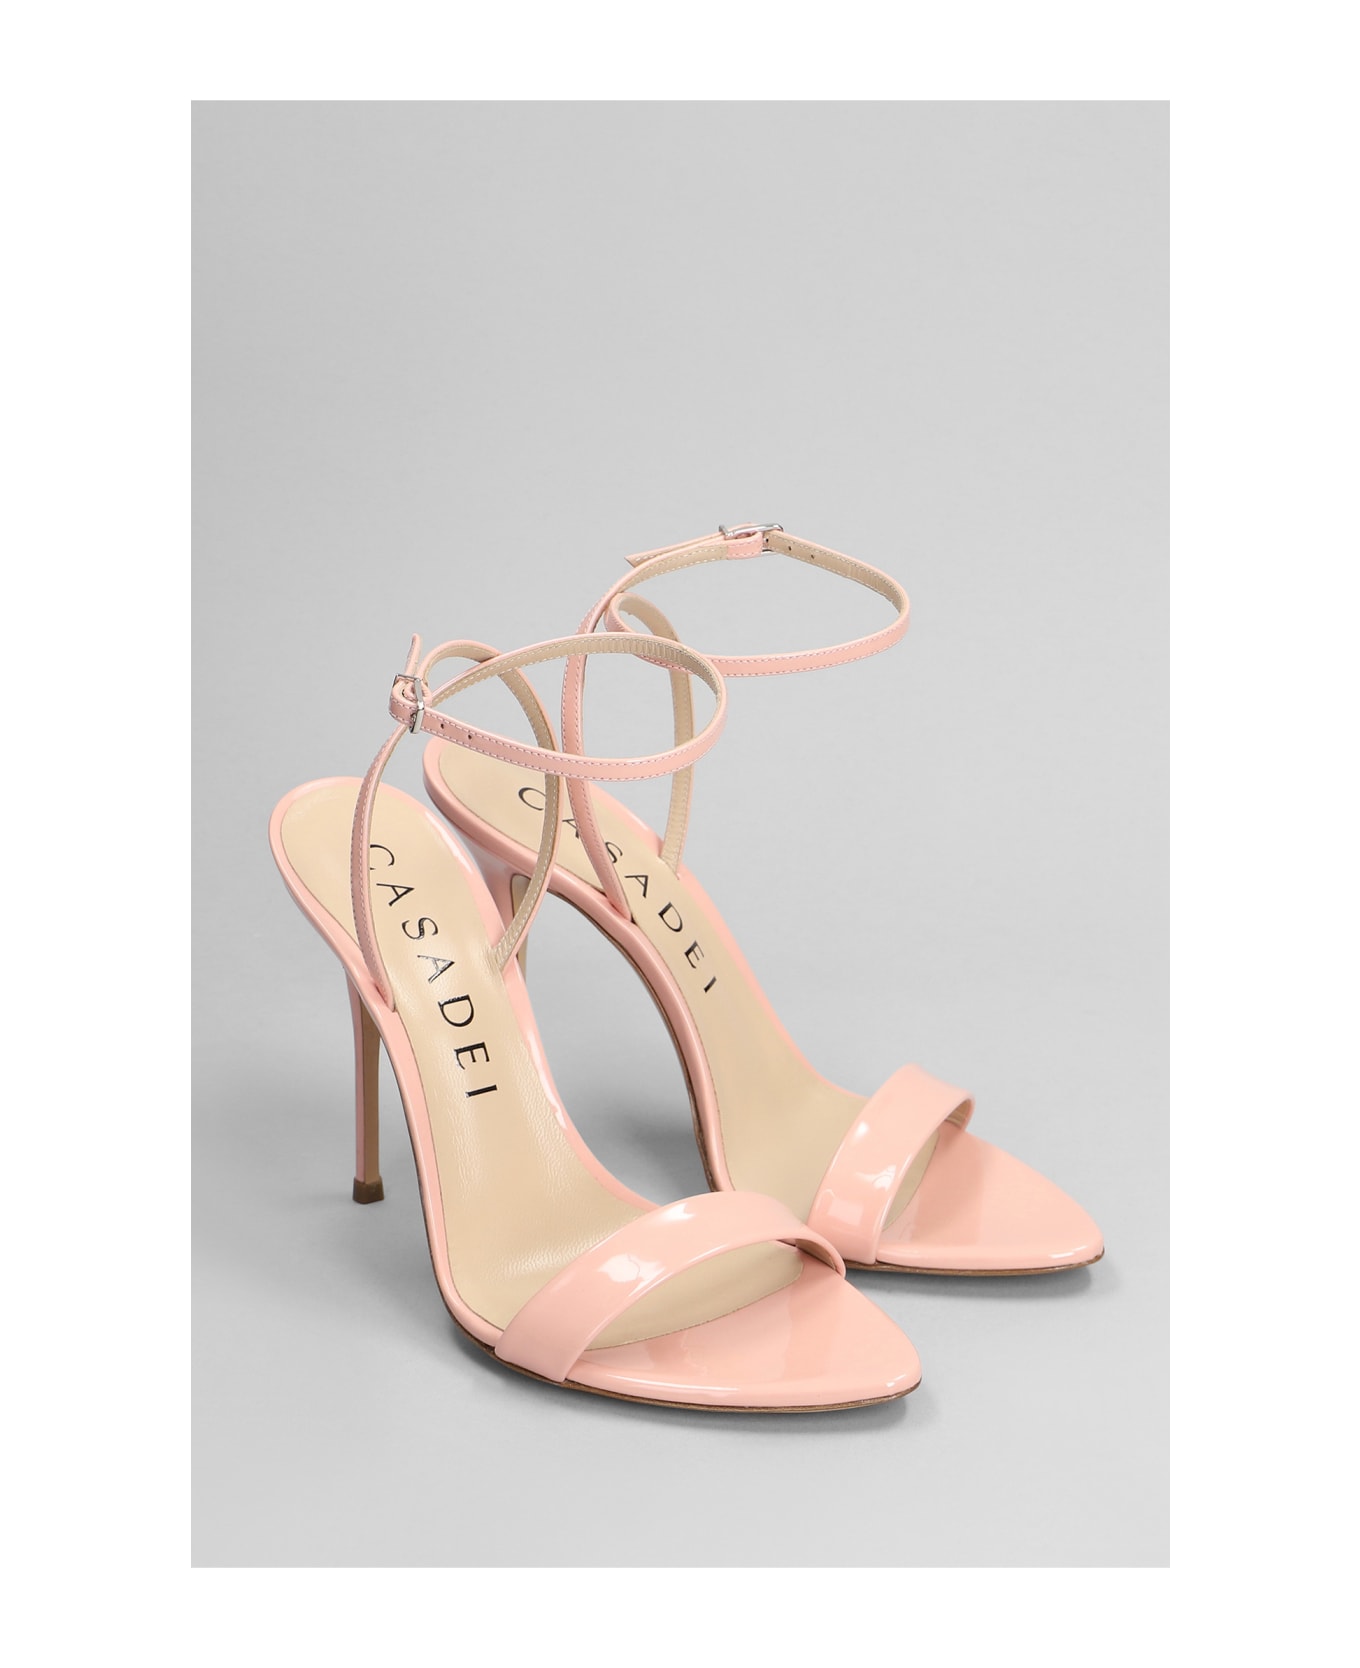 Casadei Scarlet Sandals In Rose-pink Patent Leather - rose-pink サンダル